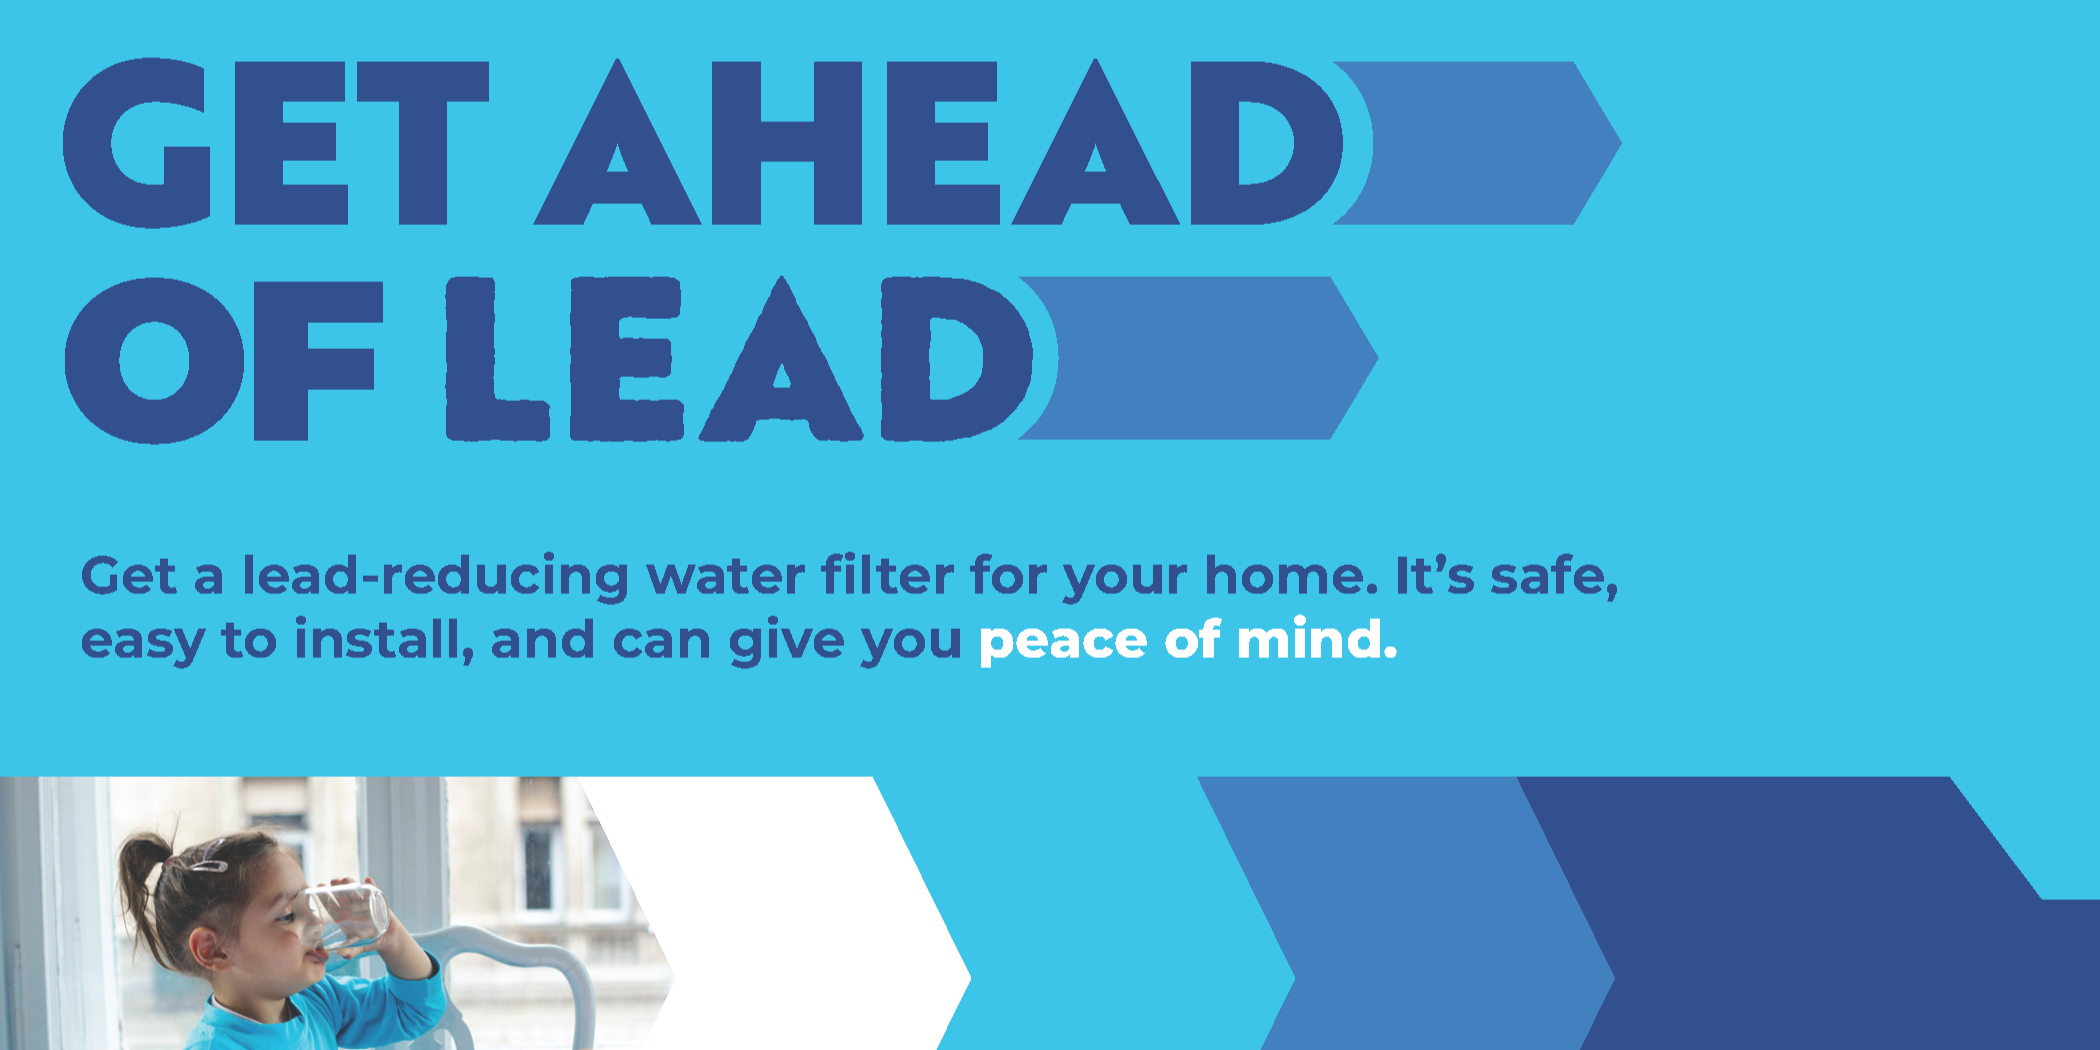 Get ahead of Lead. Get a lead-reducing water filter for your home. It’s safe, easy to install, and can give you peace of mind.